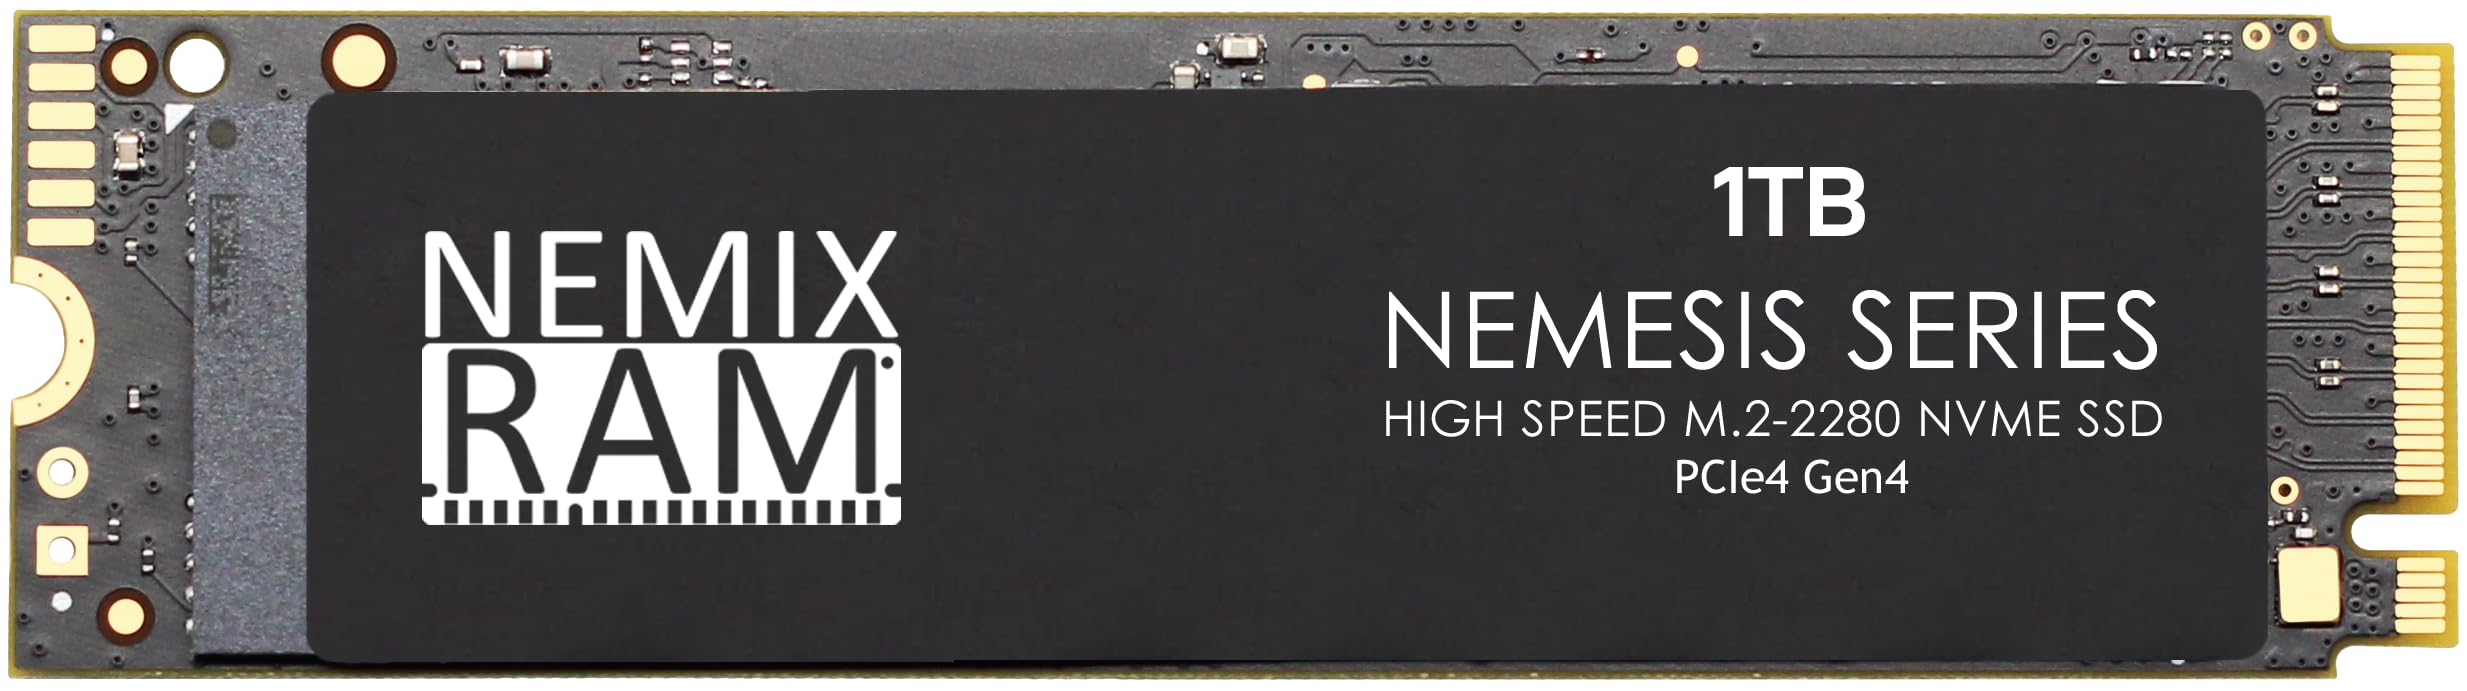 NEMIX RAM Nemesis Series 1TB M.2 2280 Gen4 PCIe NVMe SSD Write Speeds up to 7415mbps Compatible with Dell Precision 3460 Smal